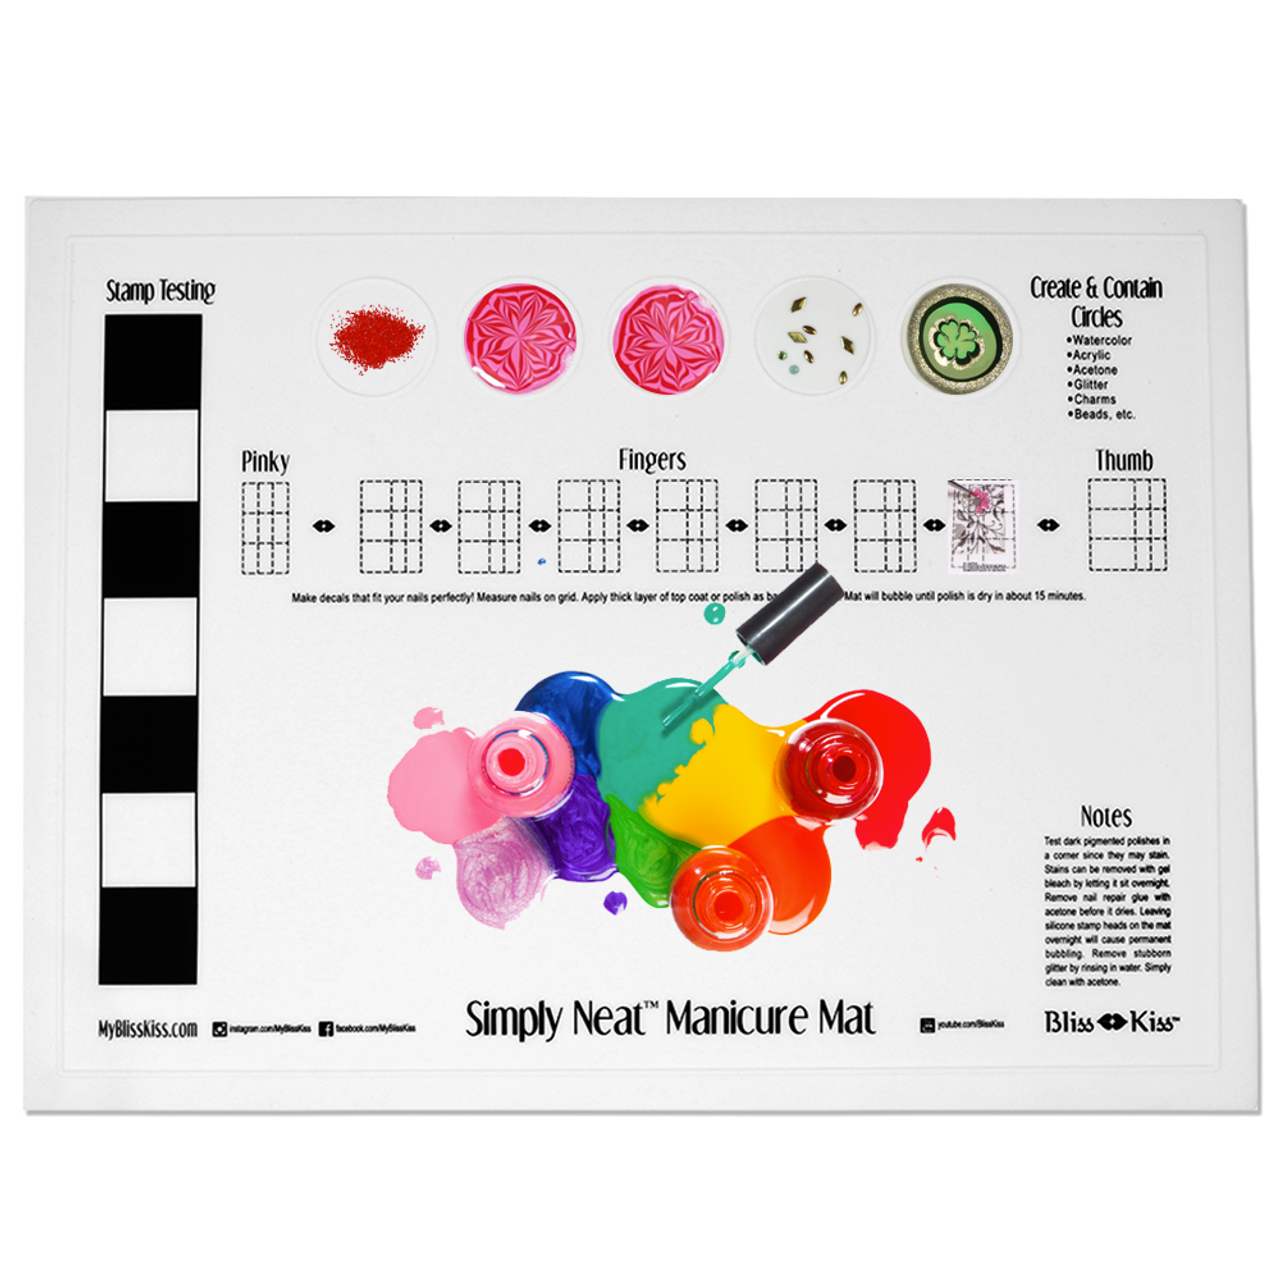 The Simply Neat™ Manicure Mat has a unique raised edge Create & Contain 
Circles that help you prevent spills and keeps your creativity neatly contained to the mat... and not all over your workspace.